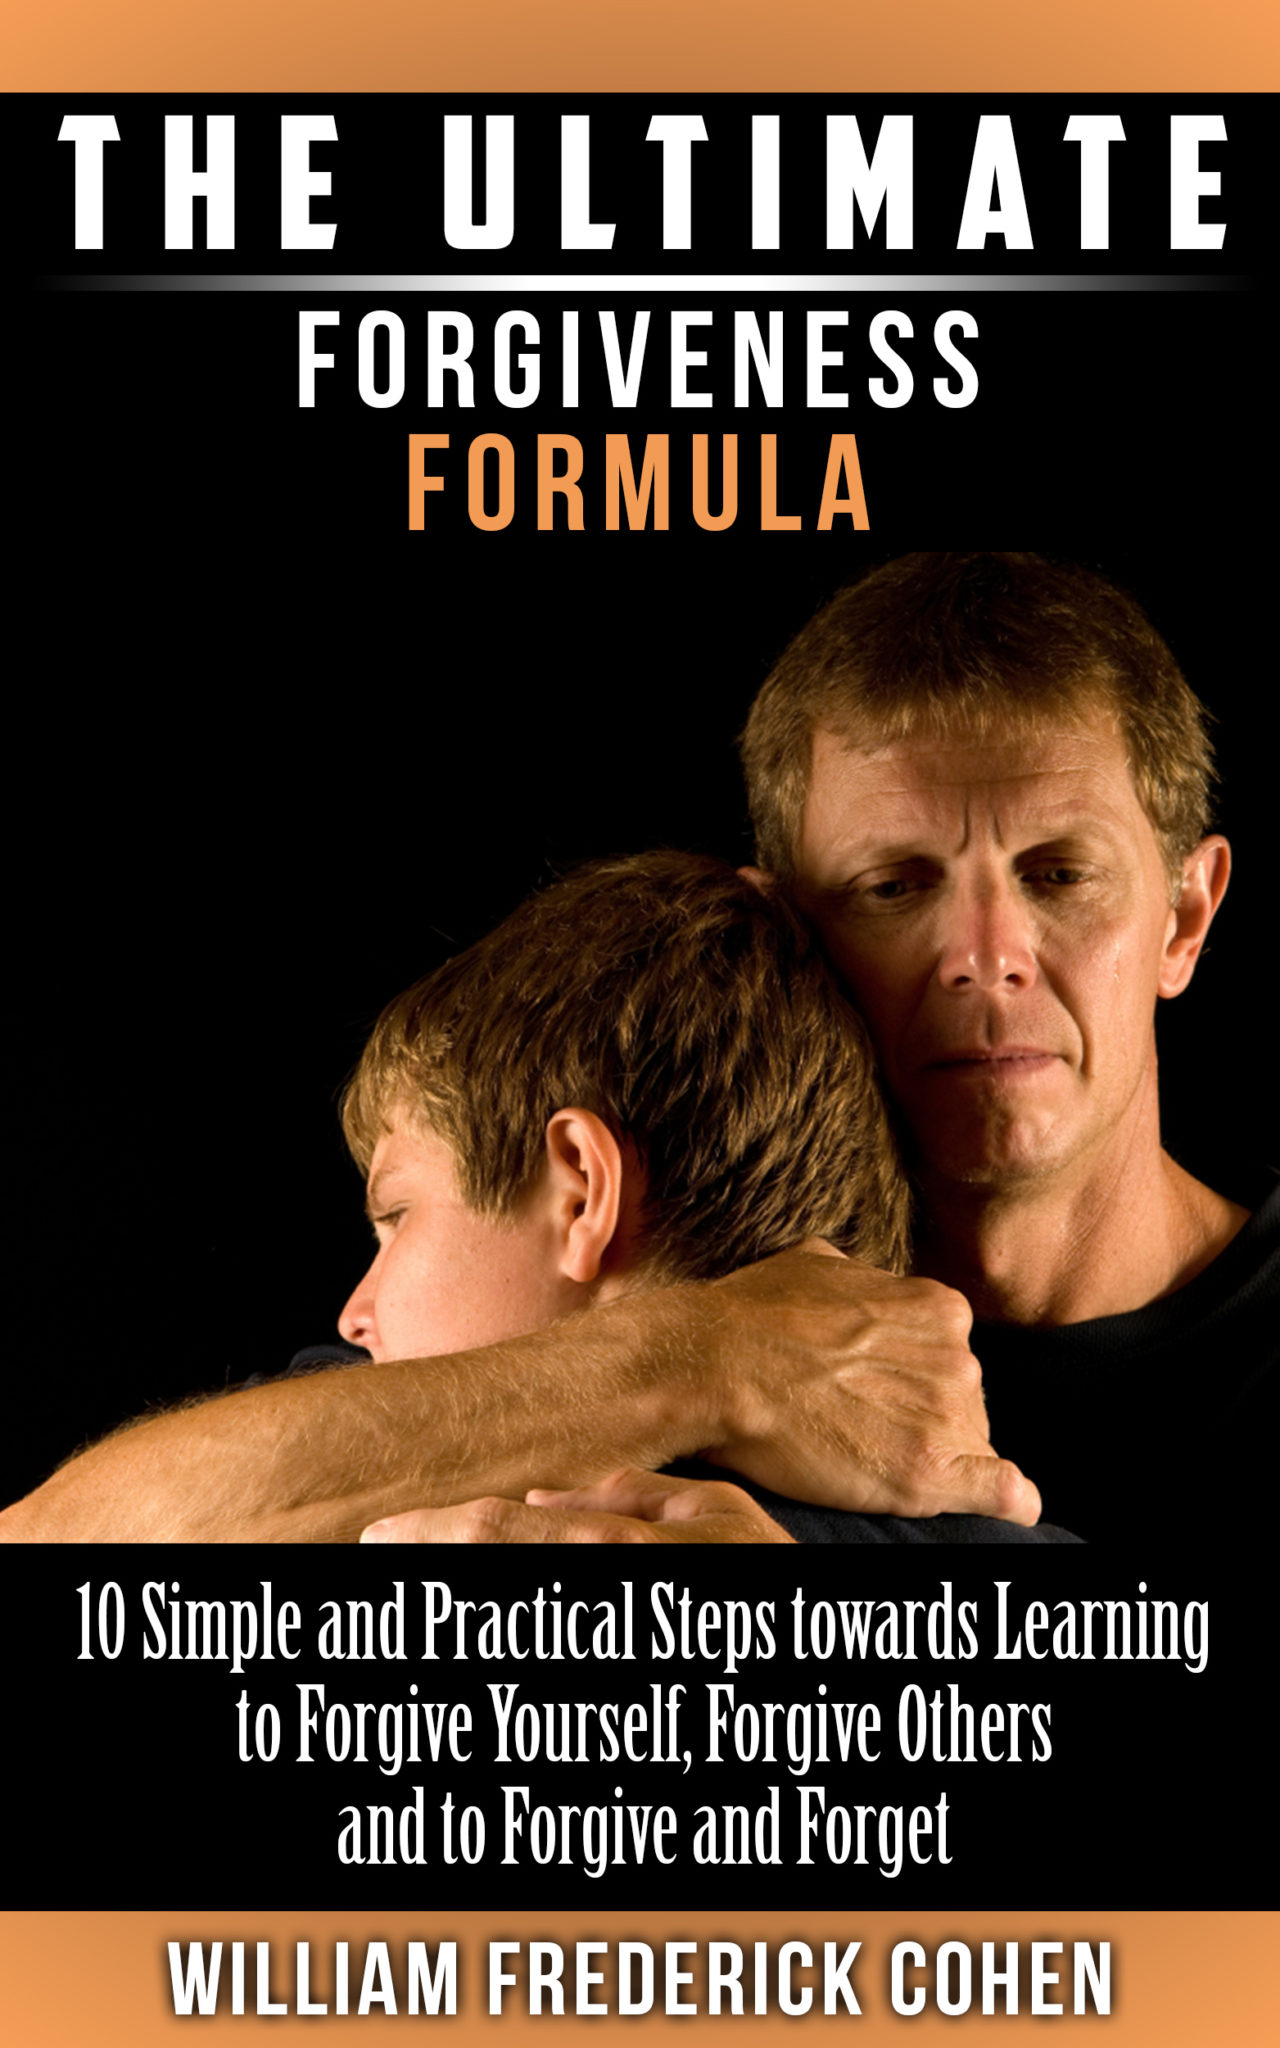 FREE: The Ultimate Forgiveness Formula: Understand The Different Aspects Towards Self Forgiveness by William Frederick Cohen